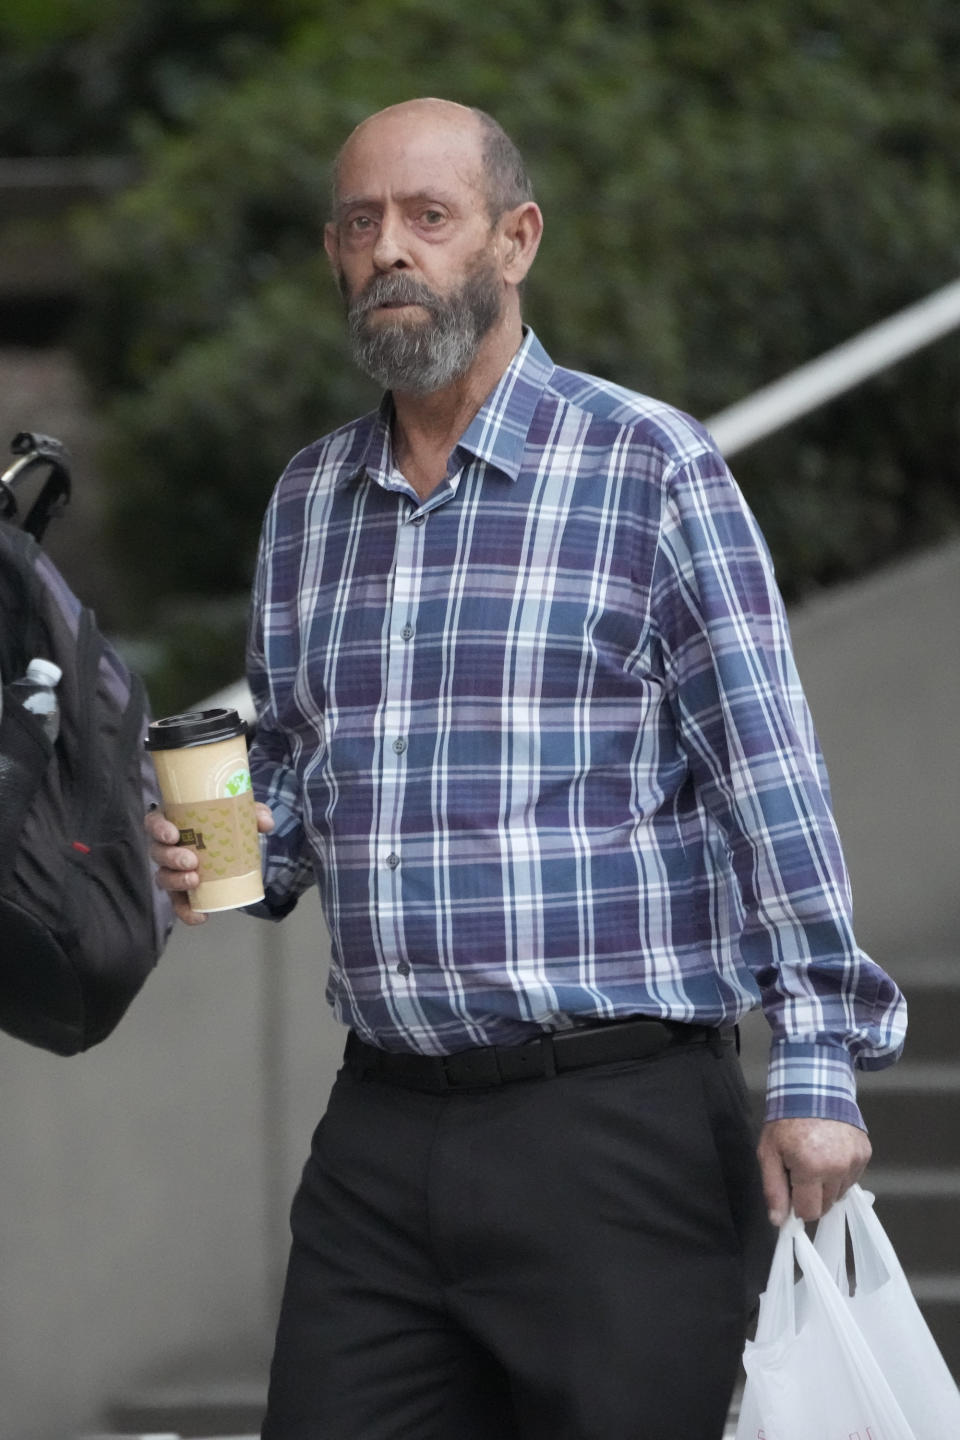 Defendant, Conception's captain Jerry Boylan, right, arrives in federal court in Los Angeles, Wednesday, Oct. 25, 2023. Federal prosecutors are seeking justice for 34 people killed in a fire aboard a scuba dive boat called the Conception in 2019. The trial against Boylan began Tuesday with jury selection. Boylan has pleaded not guilty to one count of misconduct or neglect of ship officer. (AP Photo/Damian Dovarganes)